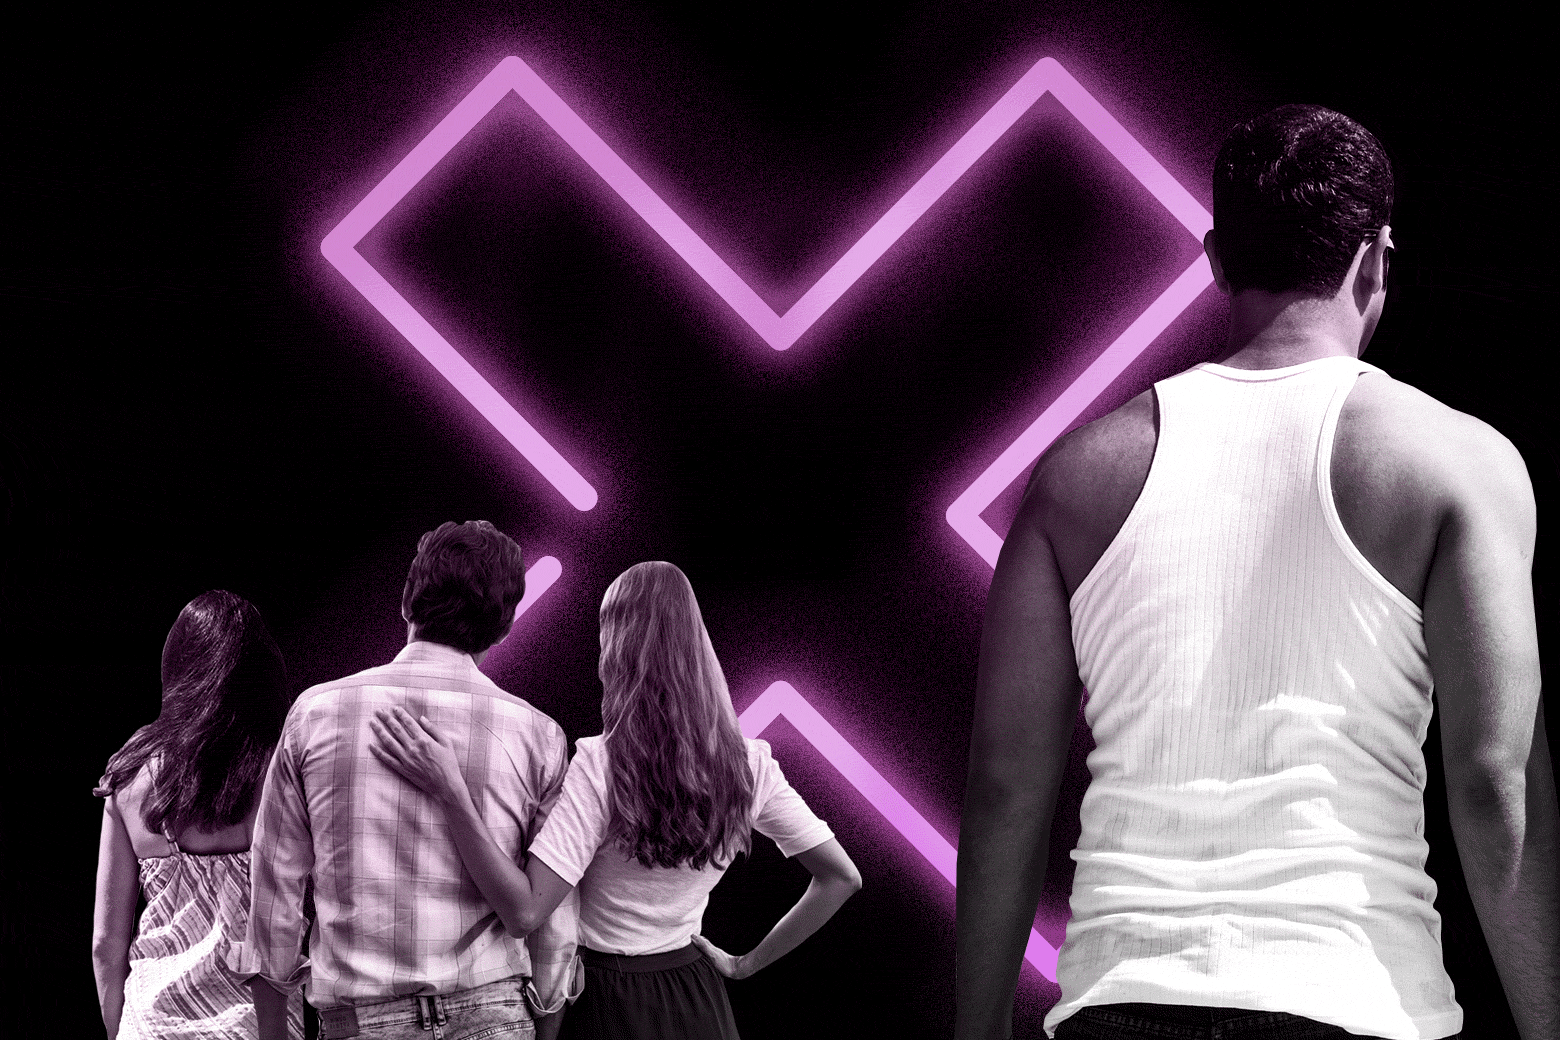 A man stands apart from a couple and another woman, with a neon X in the background.